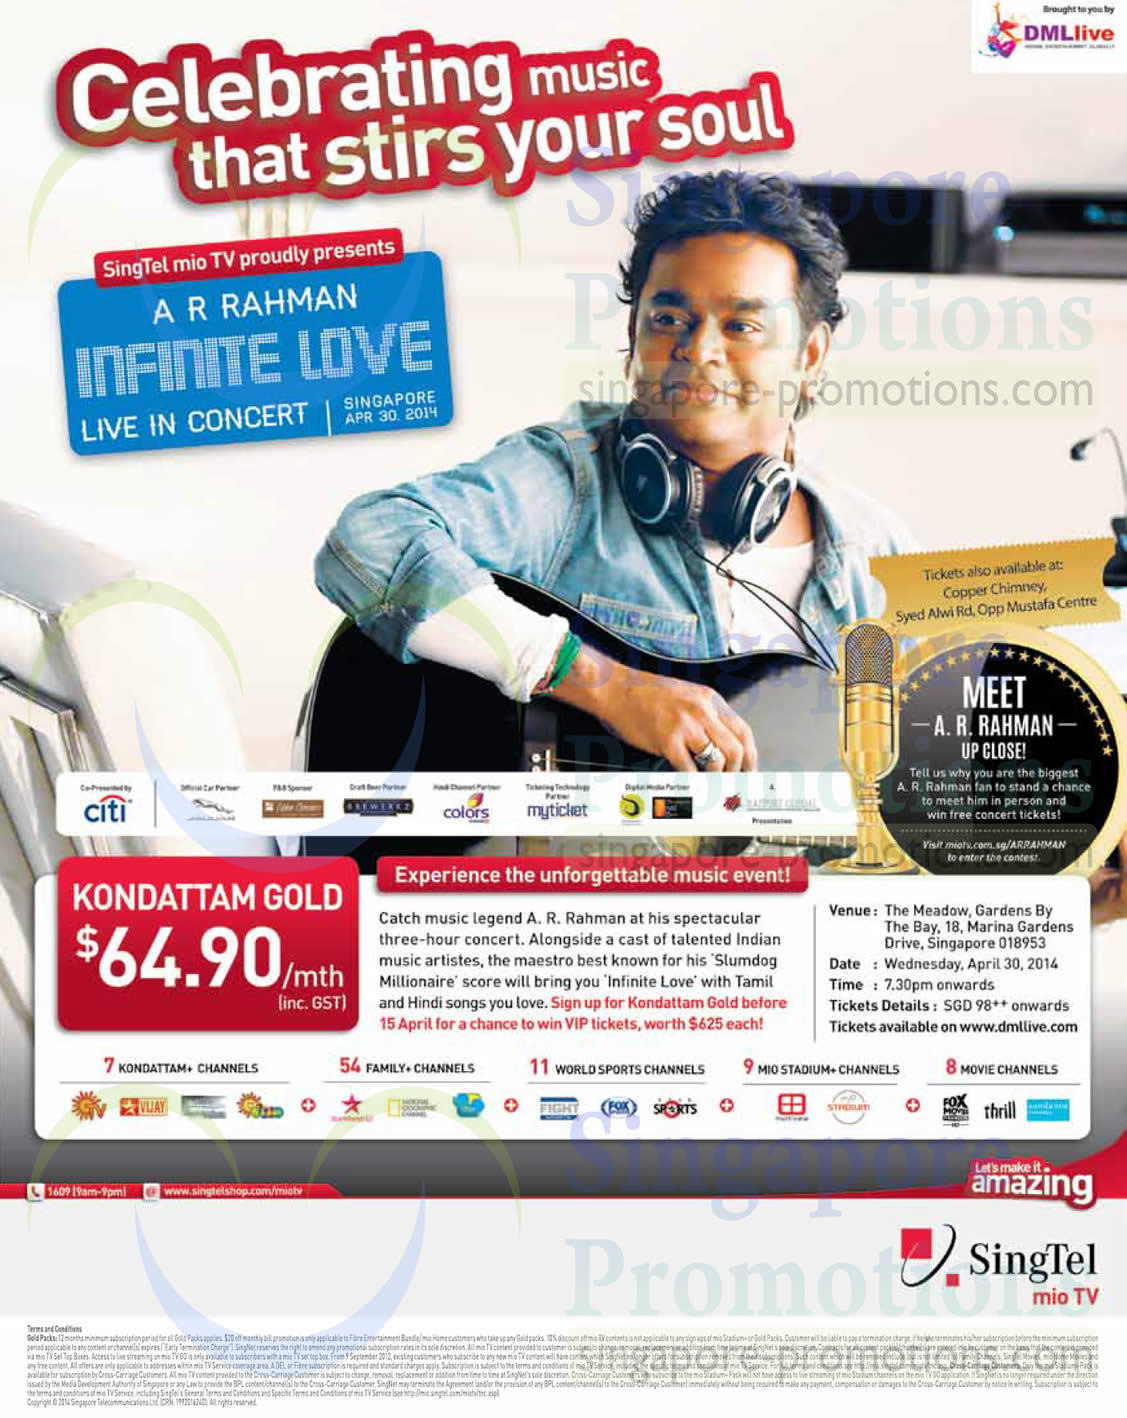 Featured image for Singtel Smartphones, Tablets, Home / Mobile Broadband & Mio TV Offers 12 - 18 Apr 2014